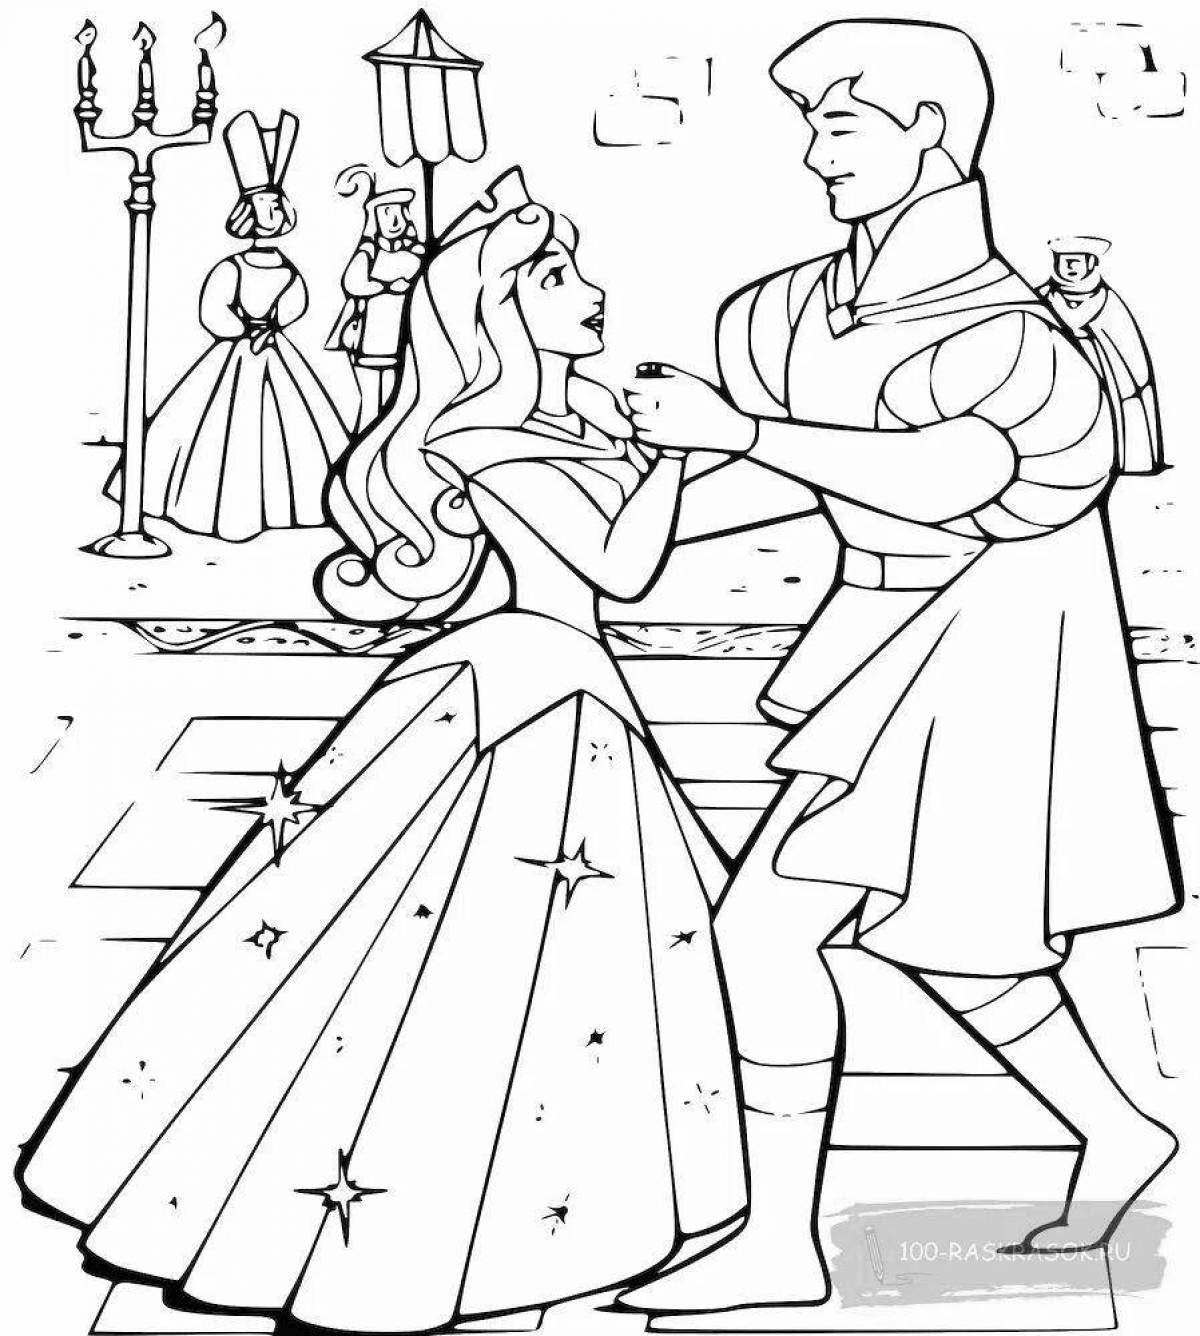 Sleeping beauty coloring book for kids